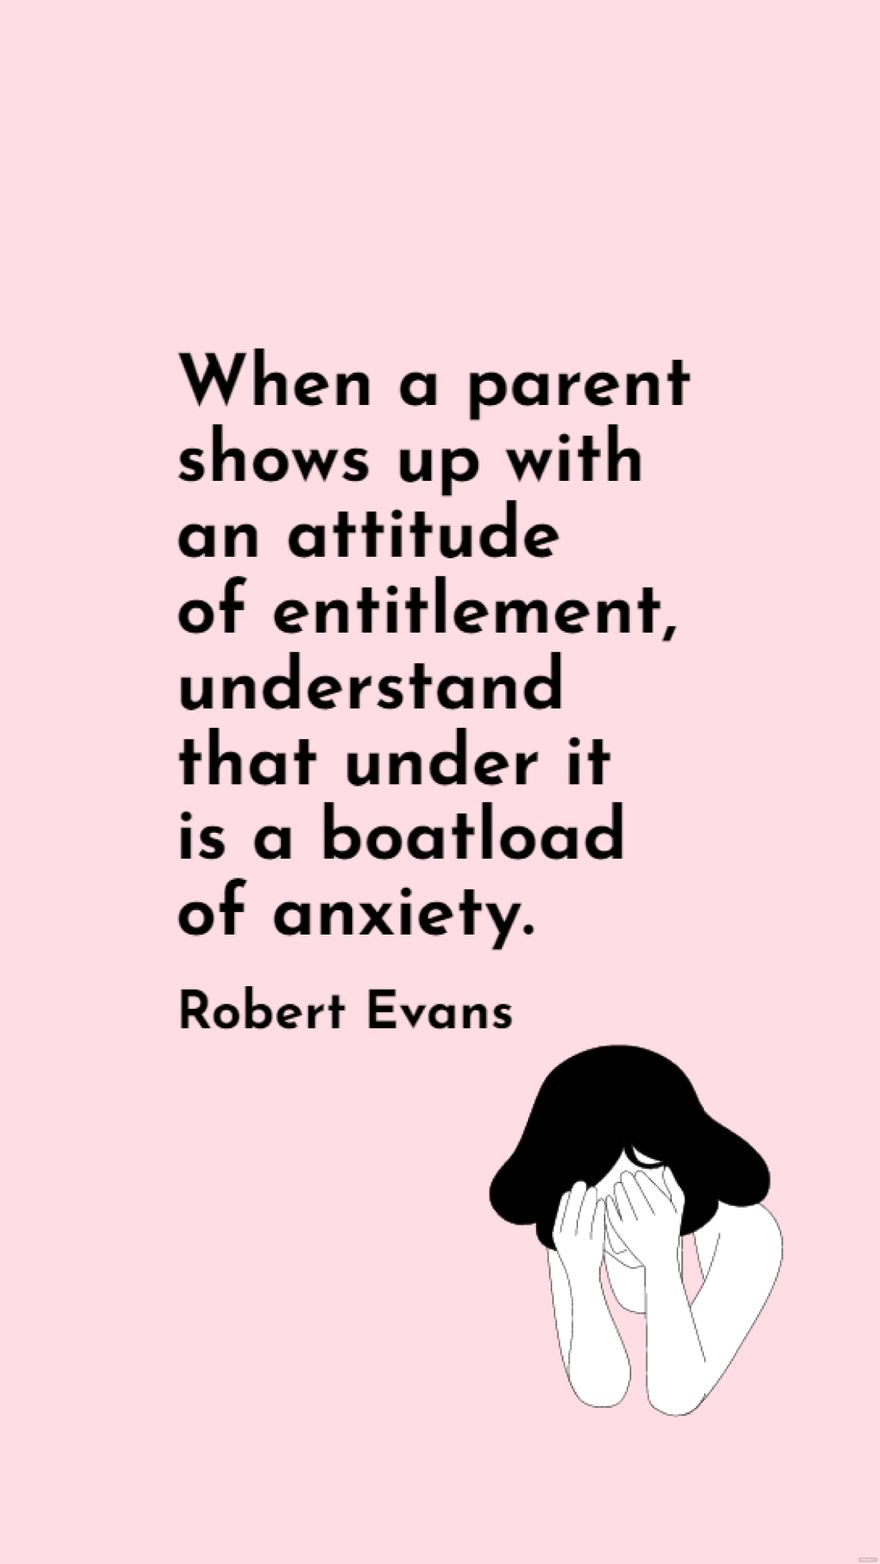 Free Robert Evans - When a parent shows up with an attitude of entitlement, understand that under it is a boatload of anxiety. in JPG